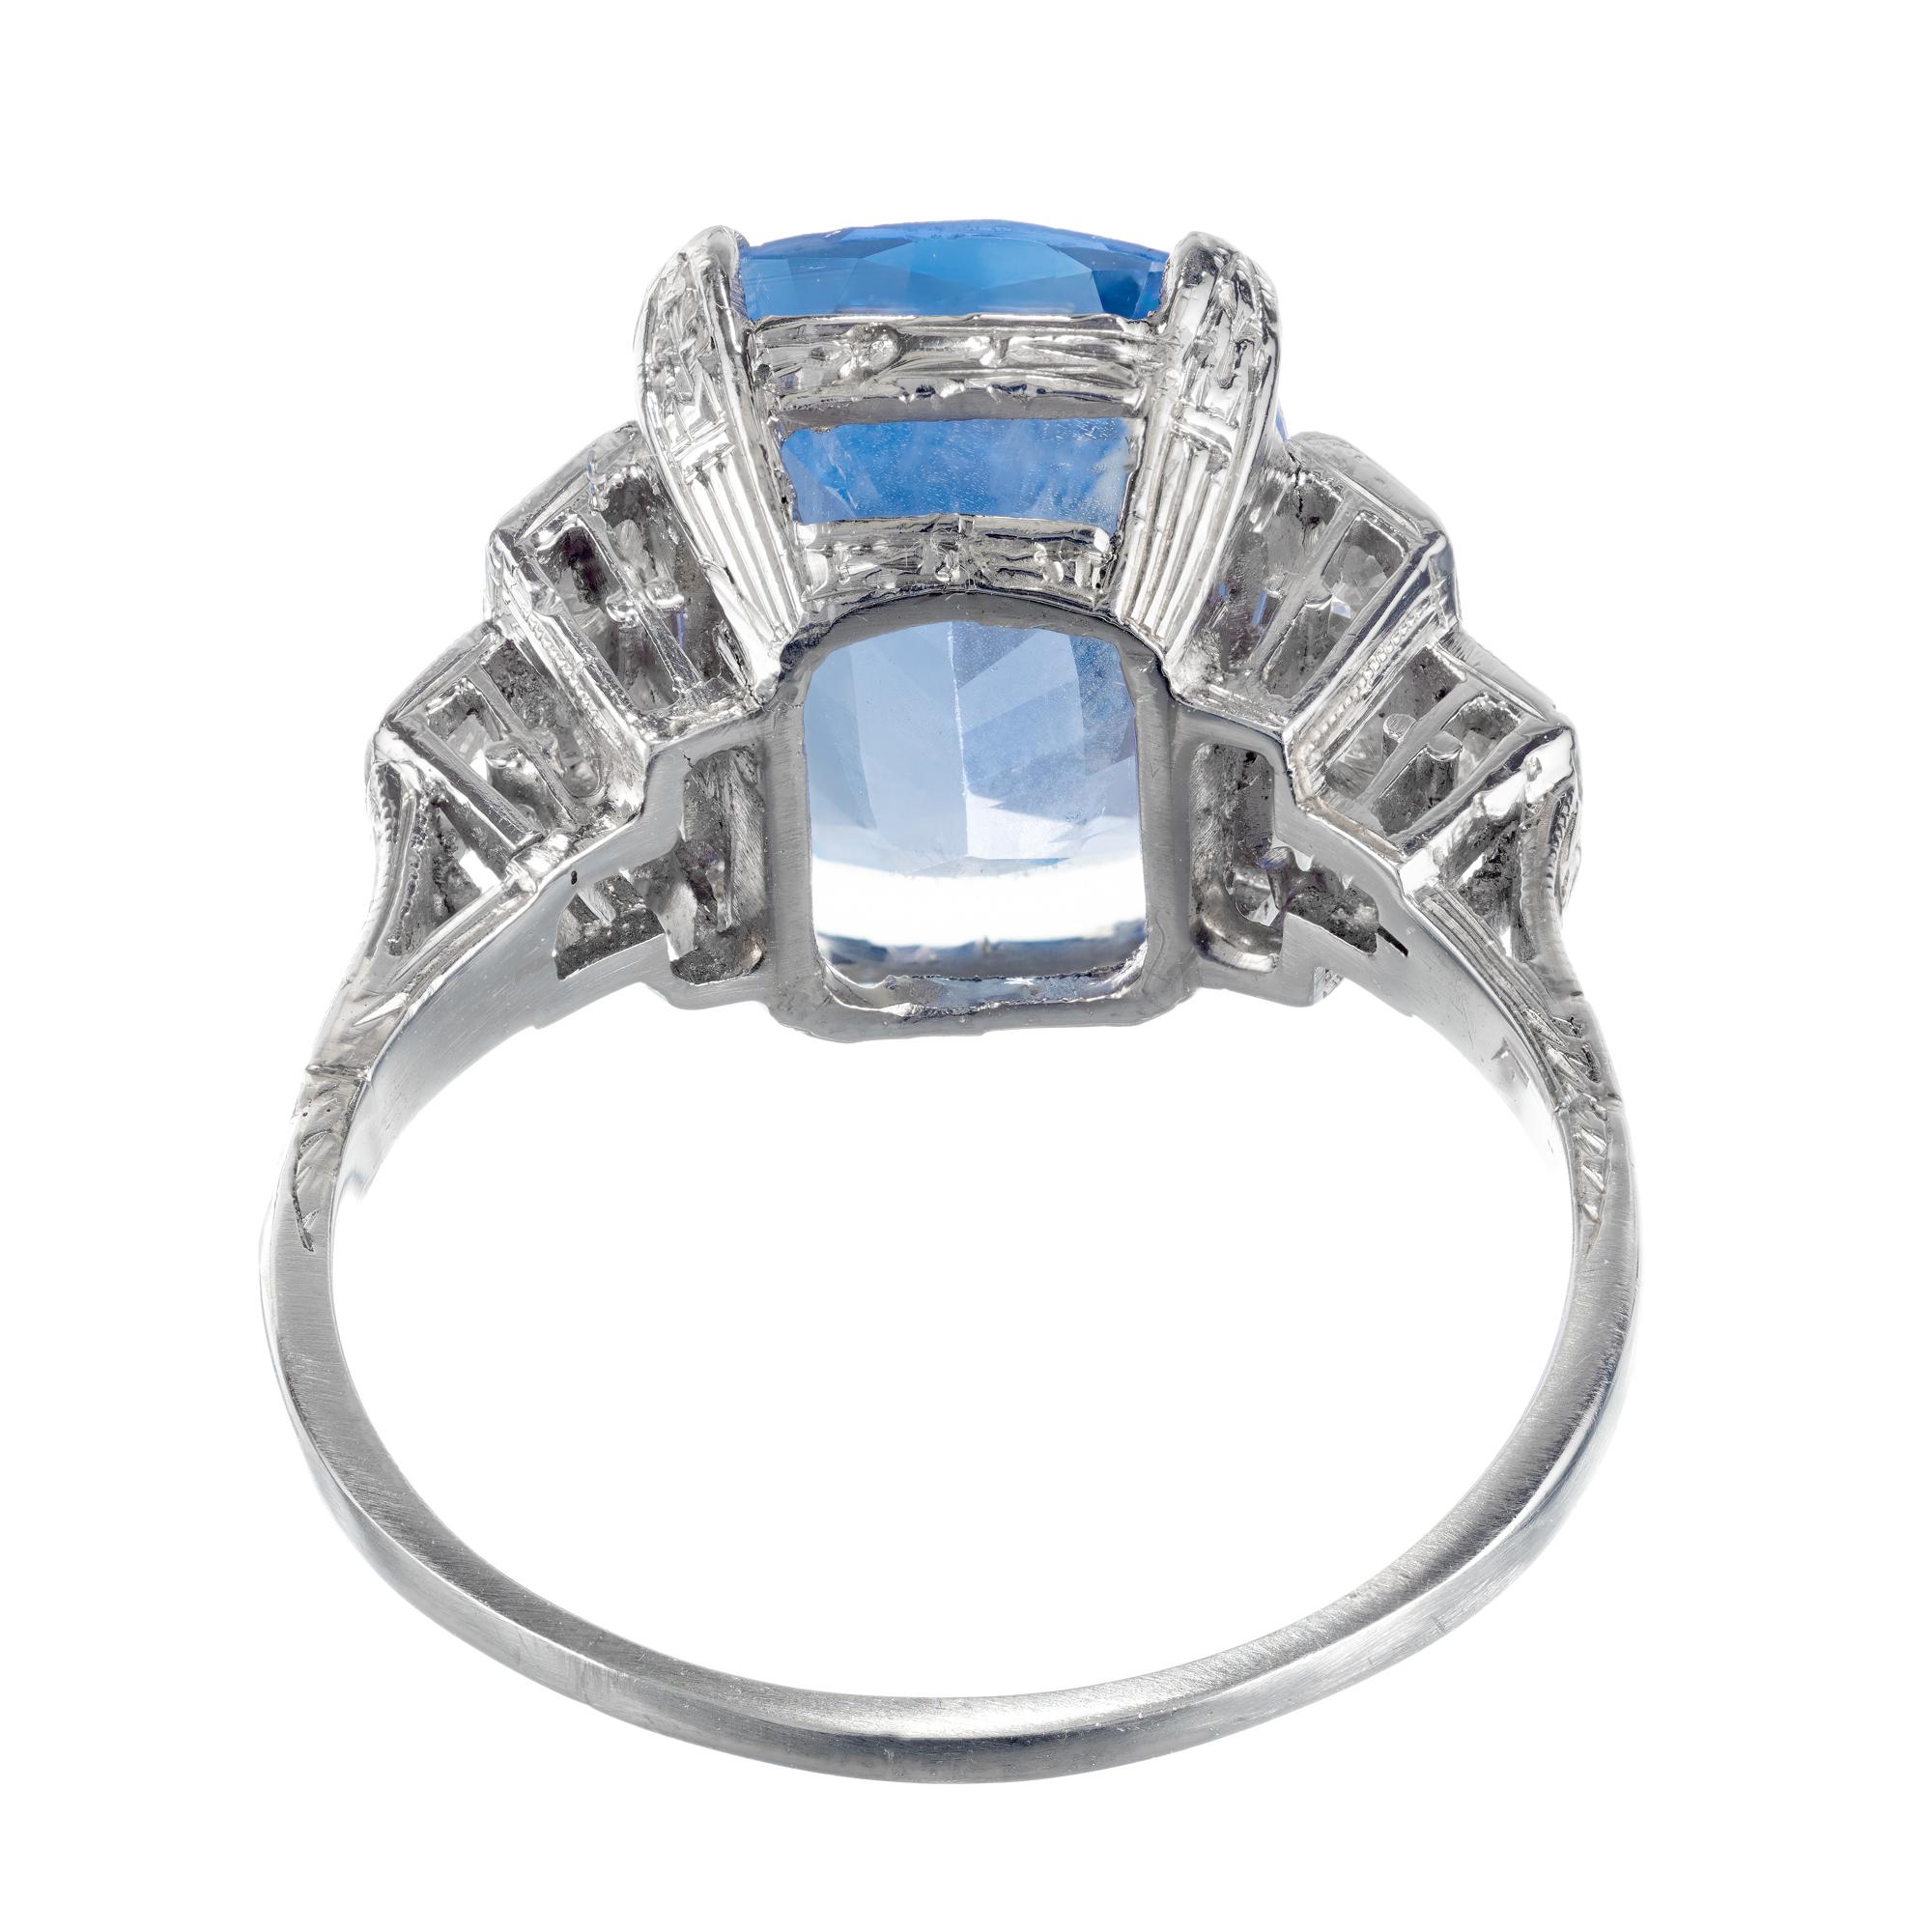 GIA Certified 5.74 Carat Sapphire Diamond Platinum Engagement Ring In Excellent Condition For Sale In Stamford, CT